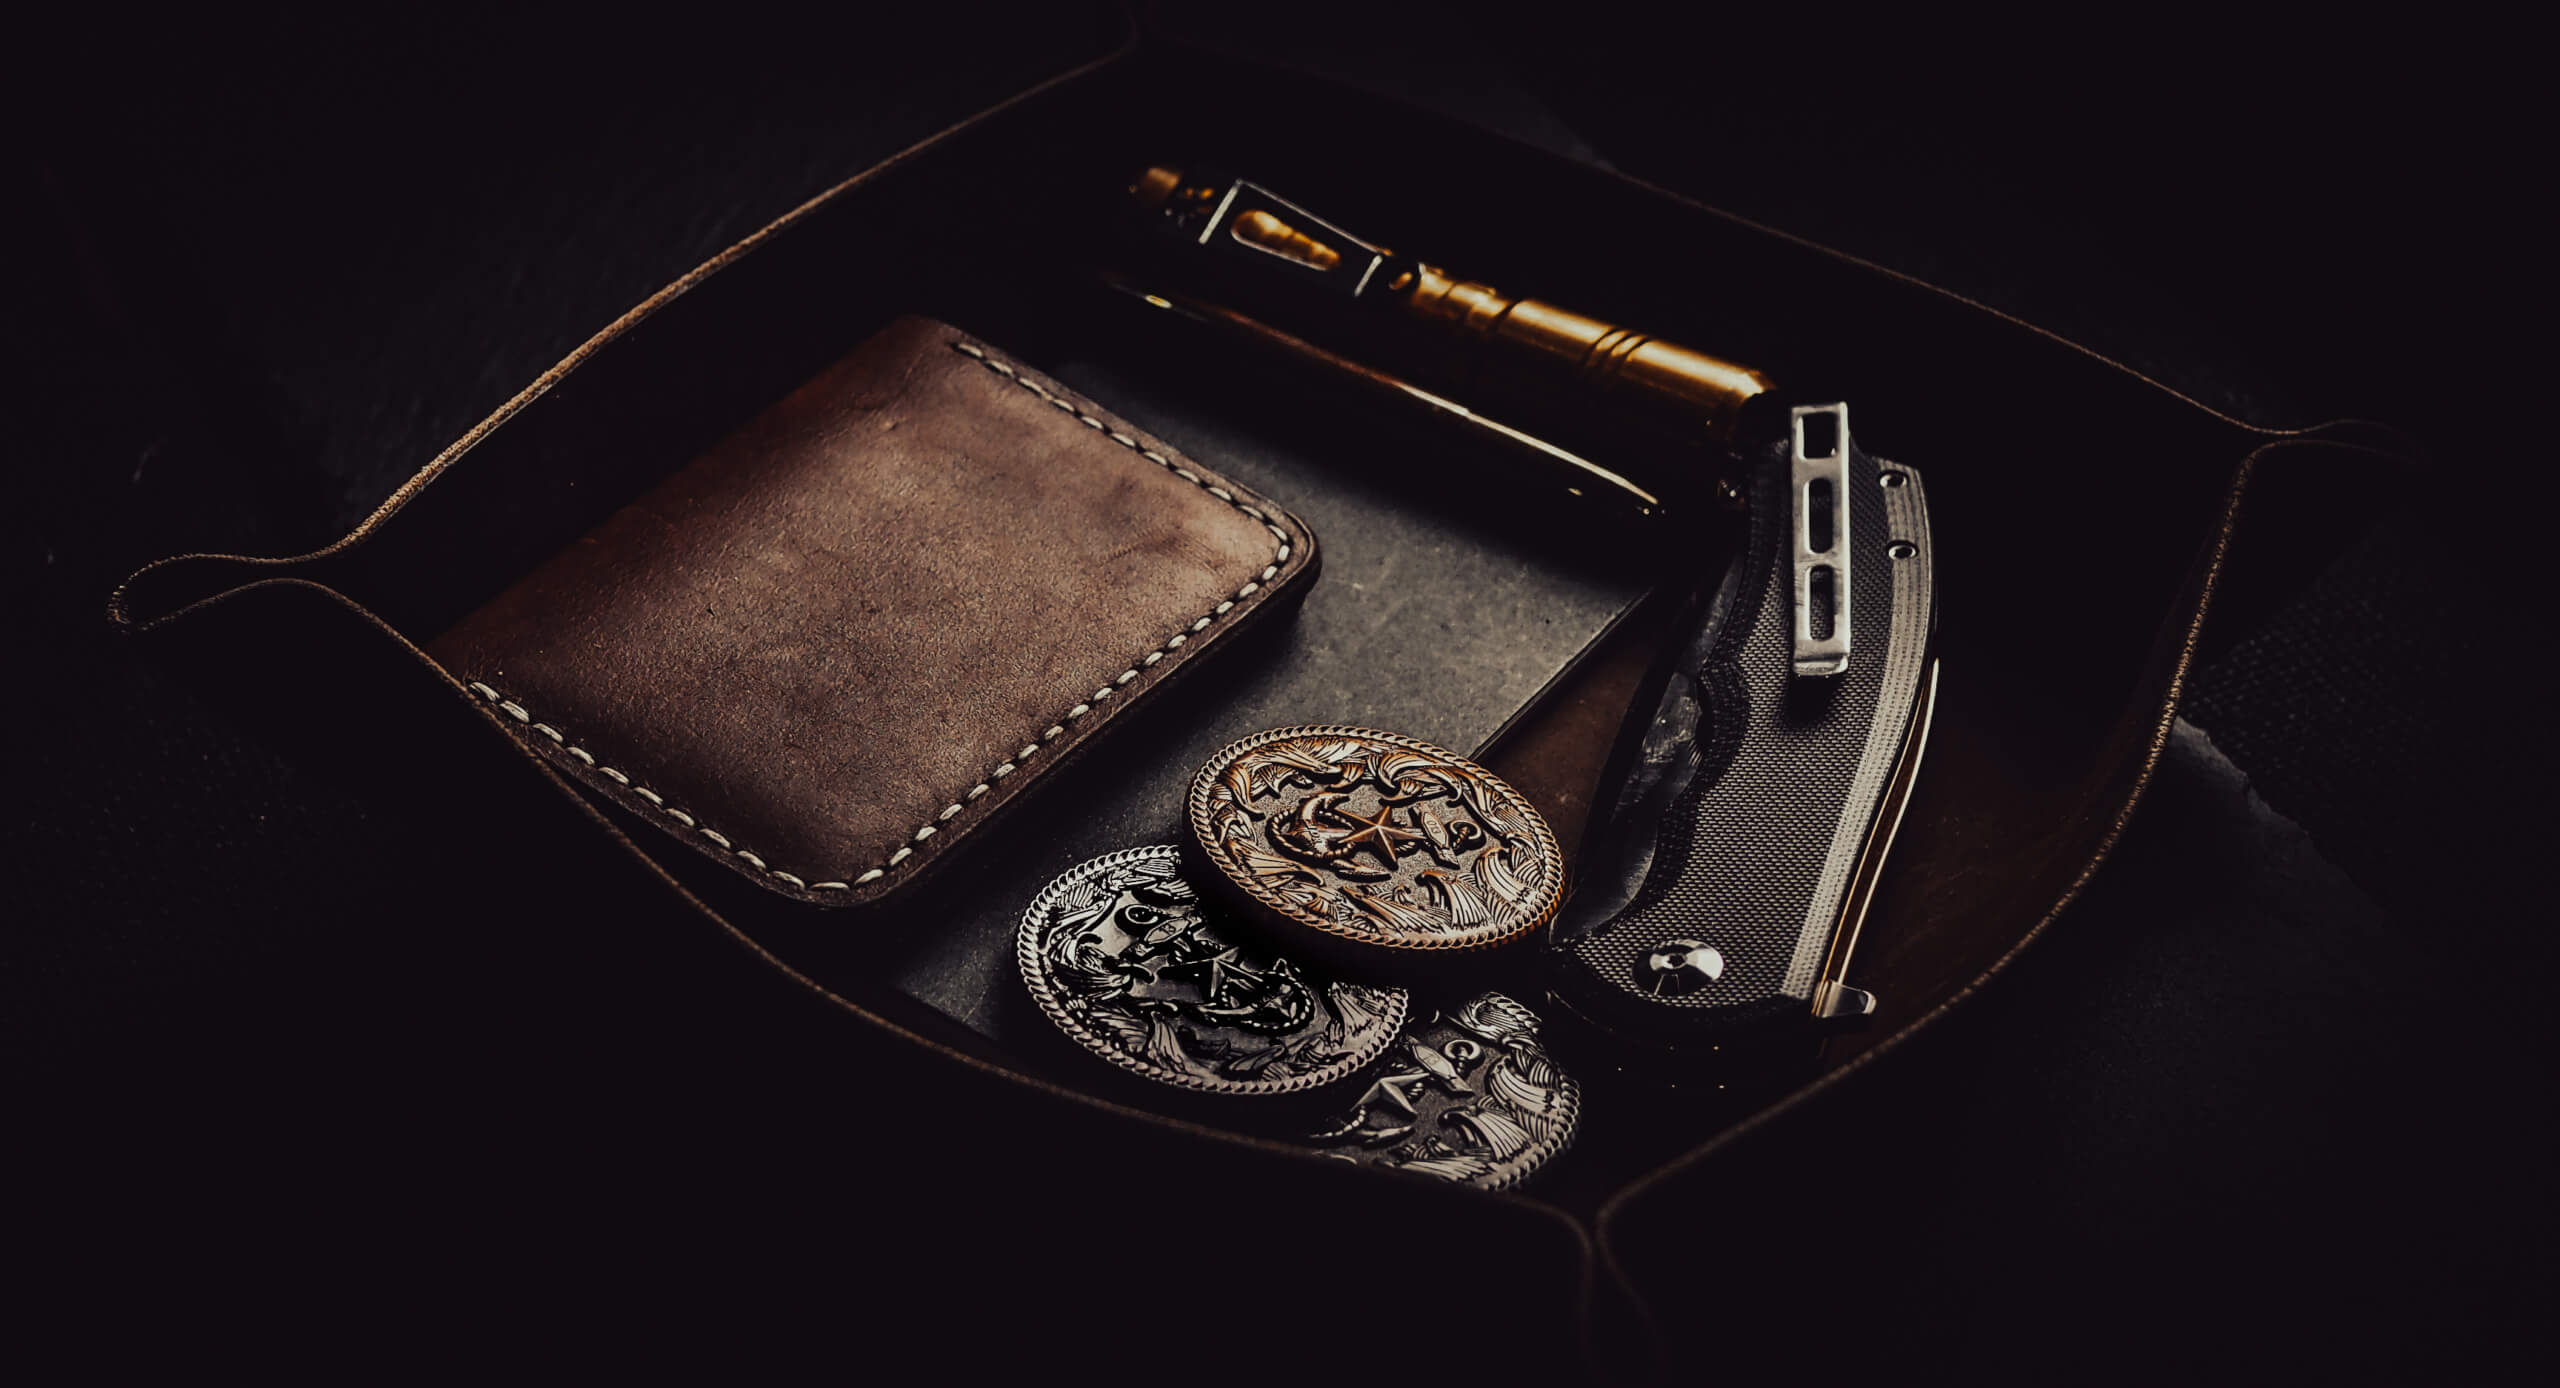 EDC SQUARE VALET TRAY: Leather Gifts/Accessories